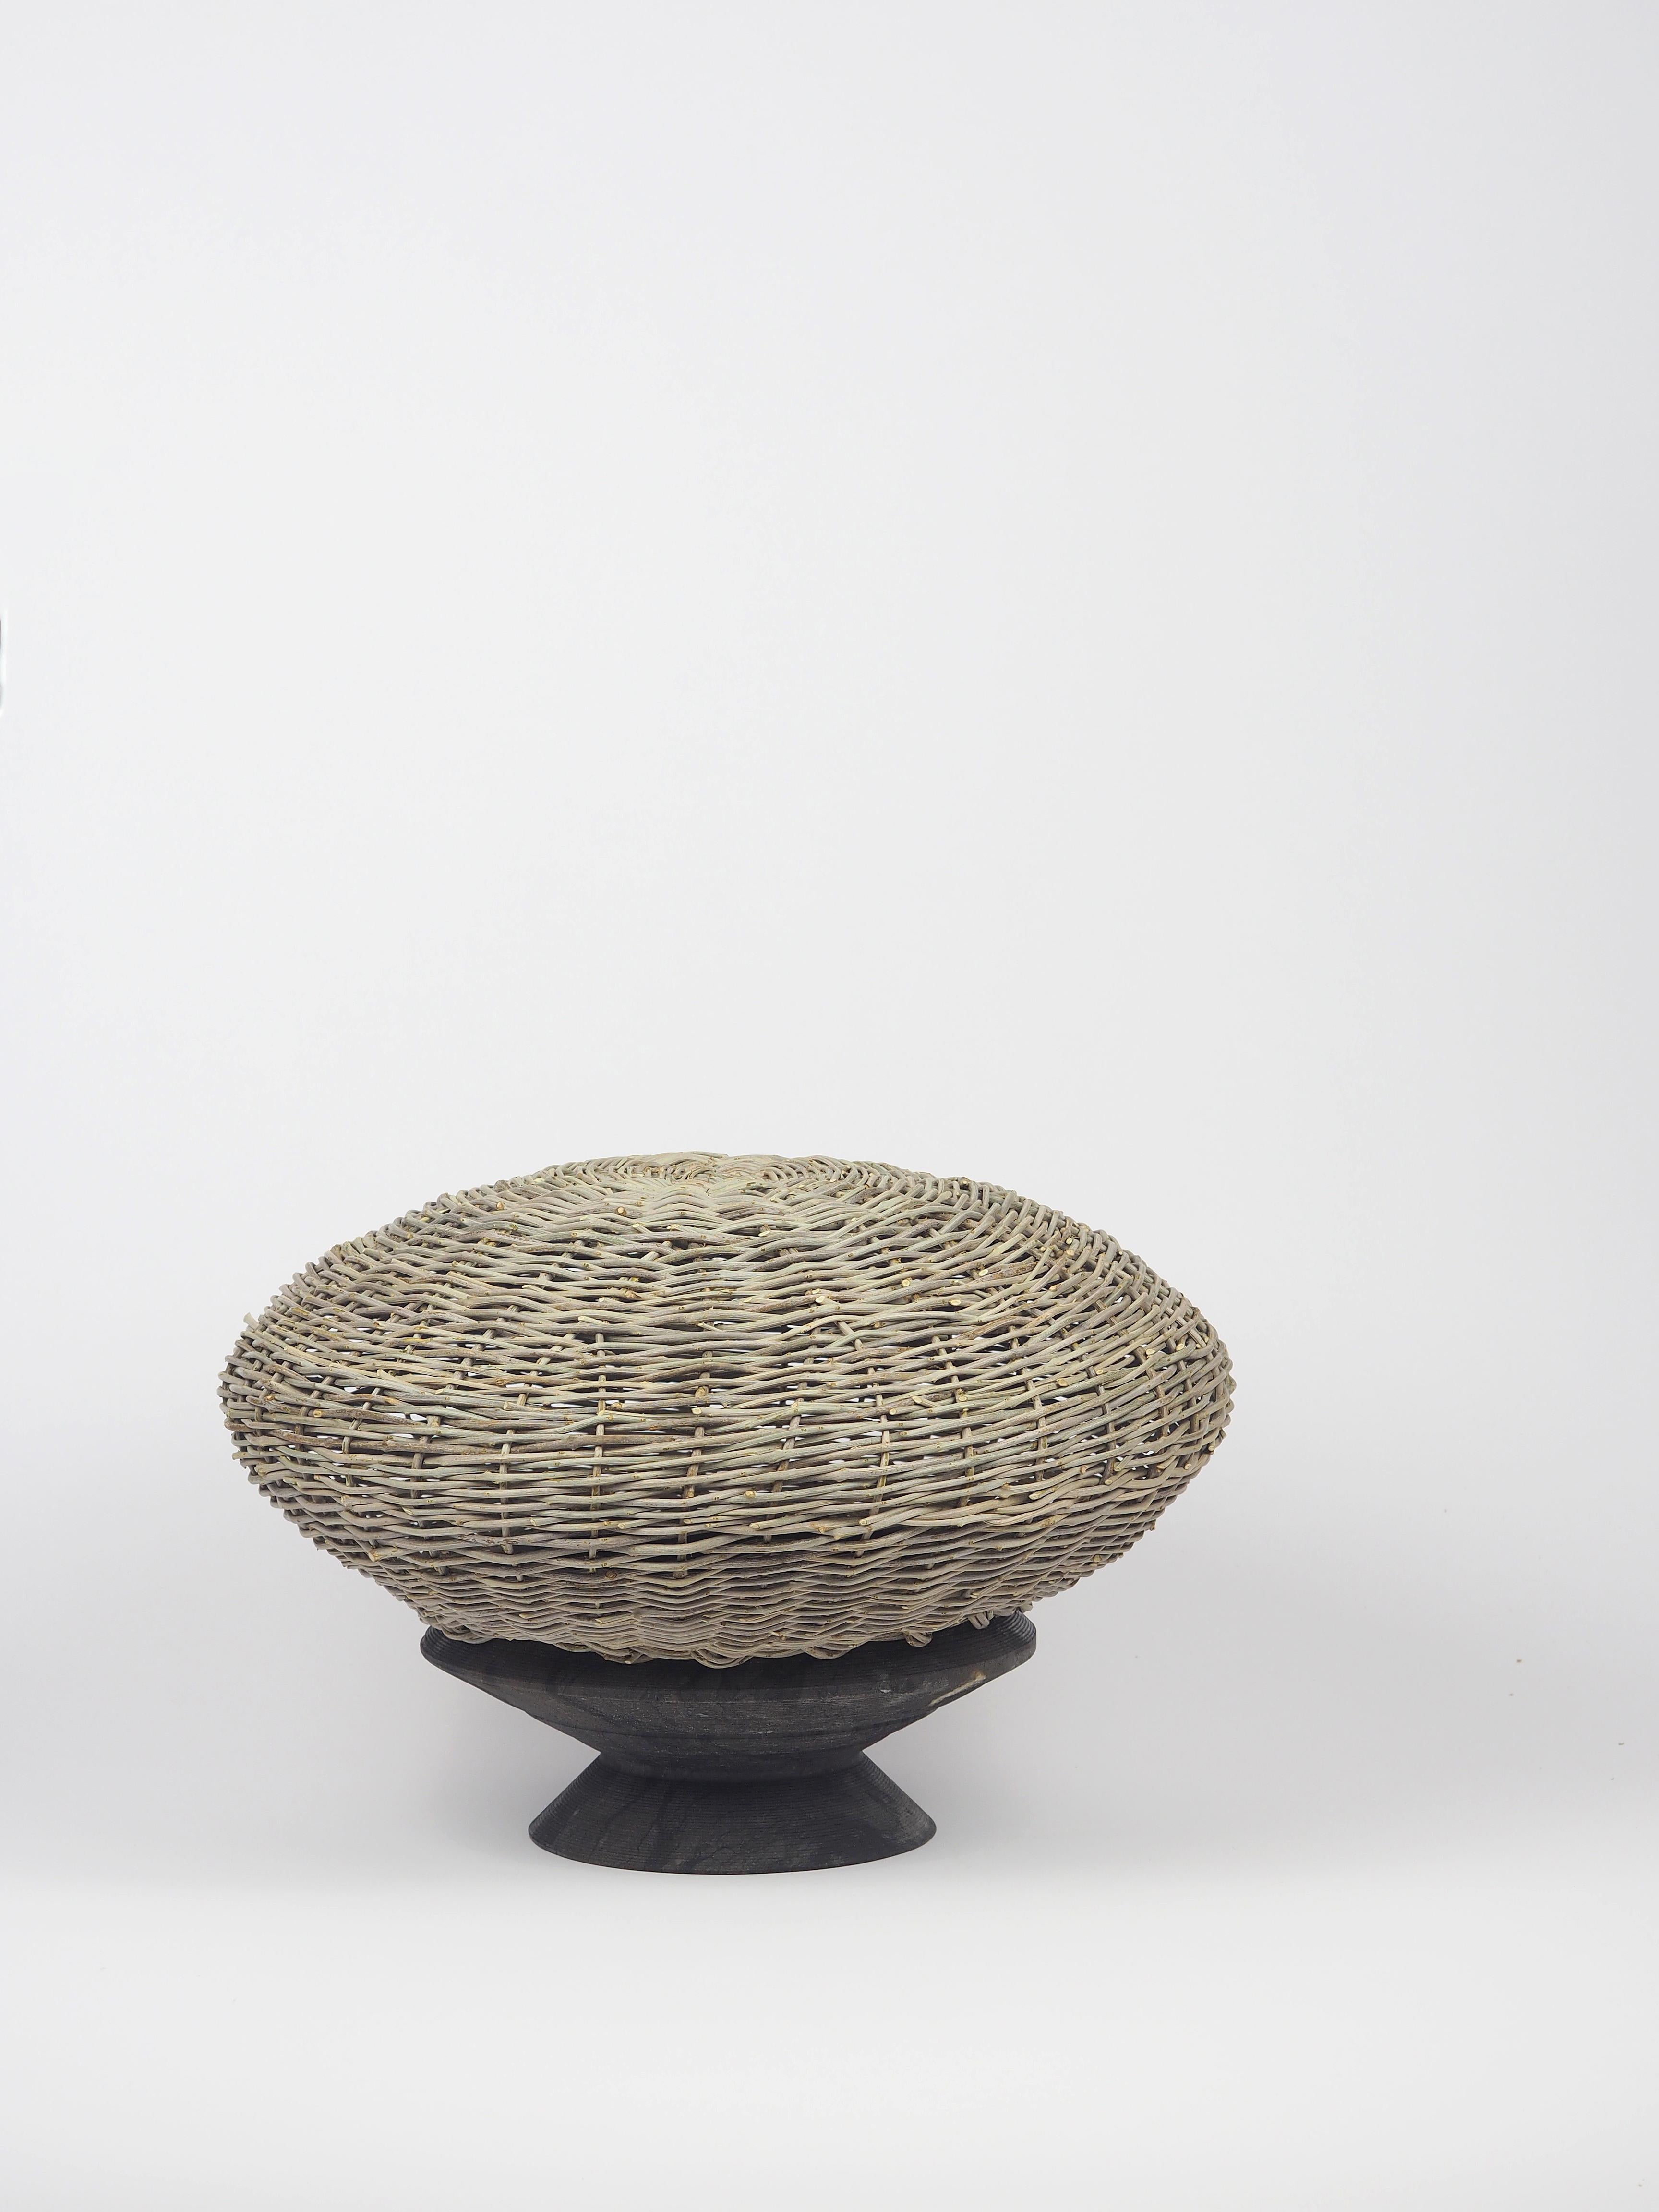 A collection of centerpieces and containers in Jerissa stone and intertwined olive branches that reflect the theme of the traditional basket, reinterpreted; recovered from a distant past, they are reviewed in a contemporary key, stylized, reworked